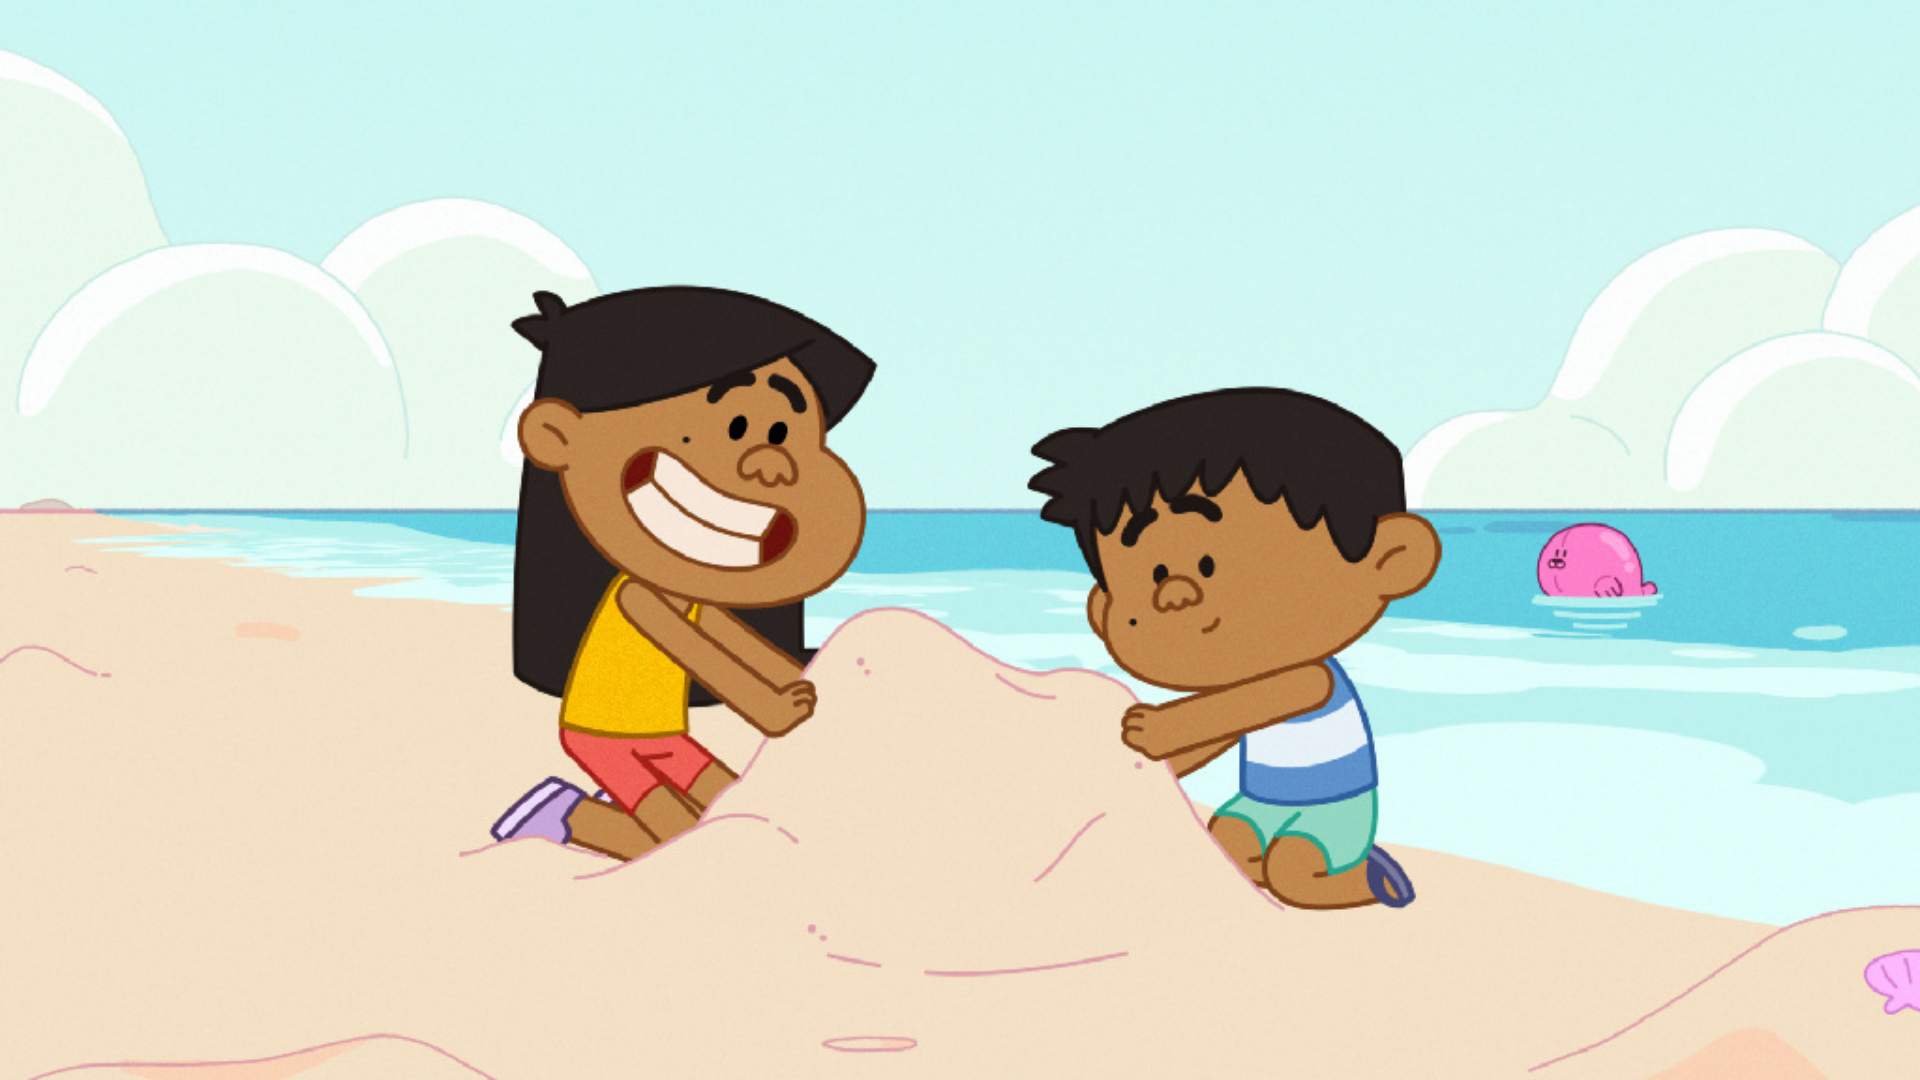 A New Series of Animated Shorts Infused with Filipino Culture